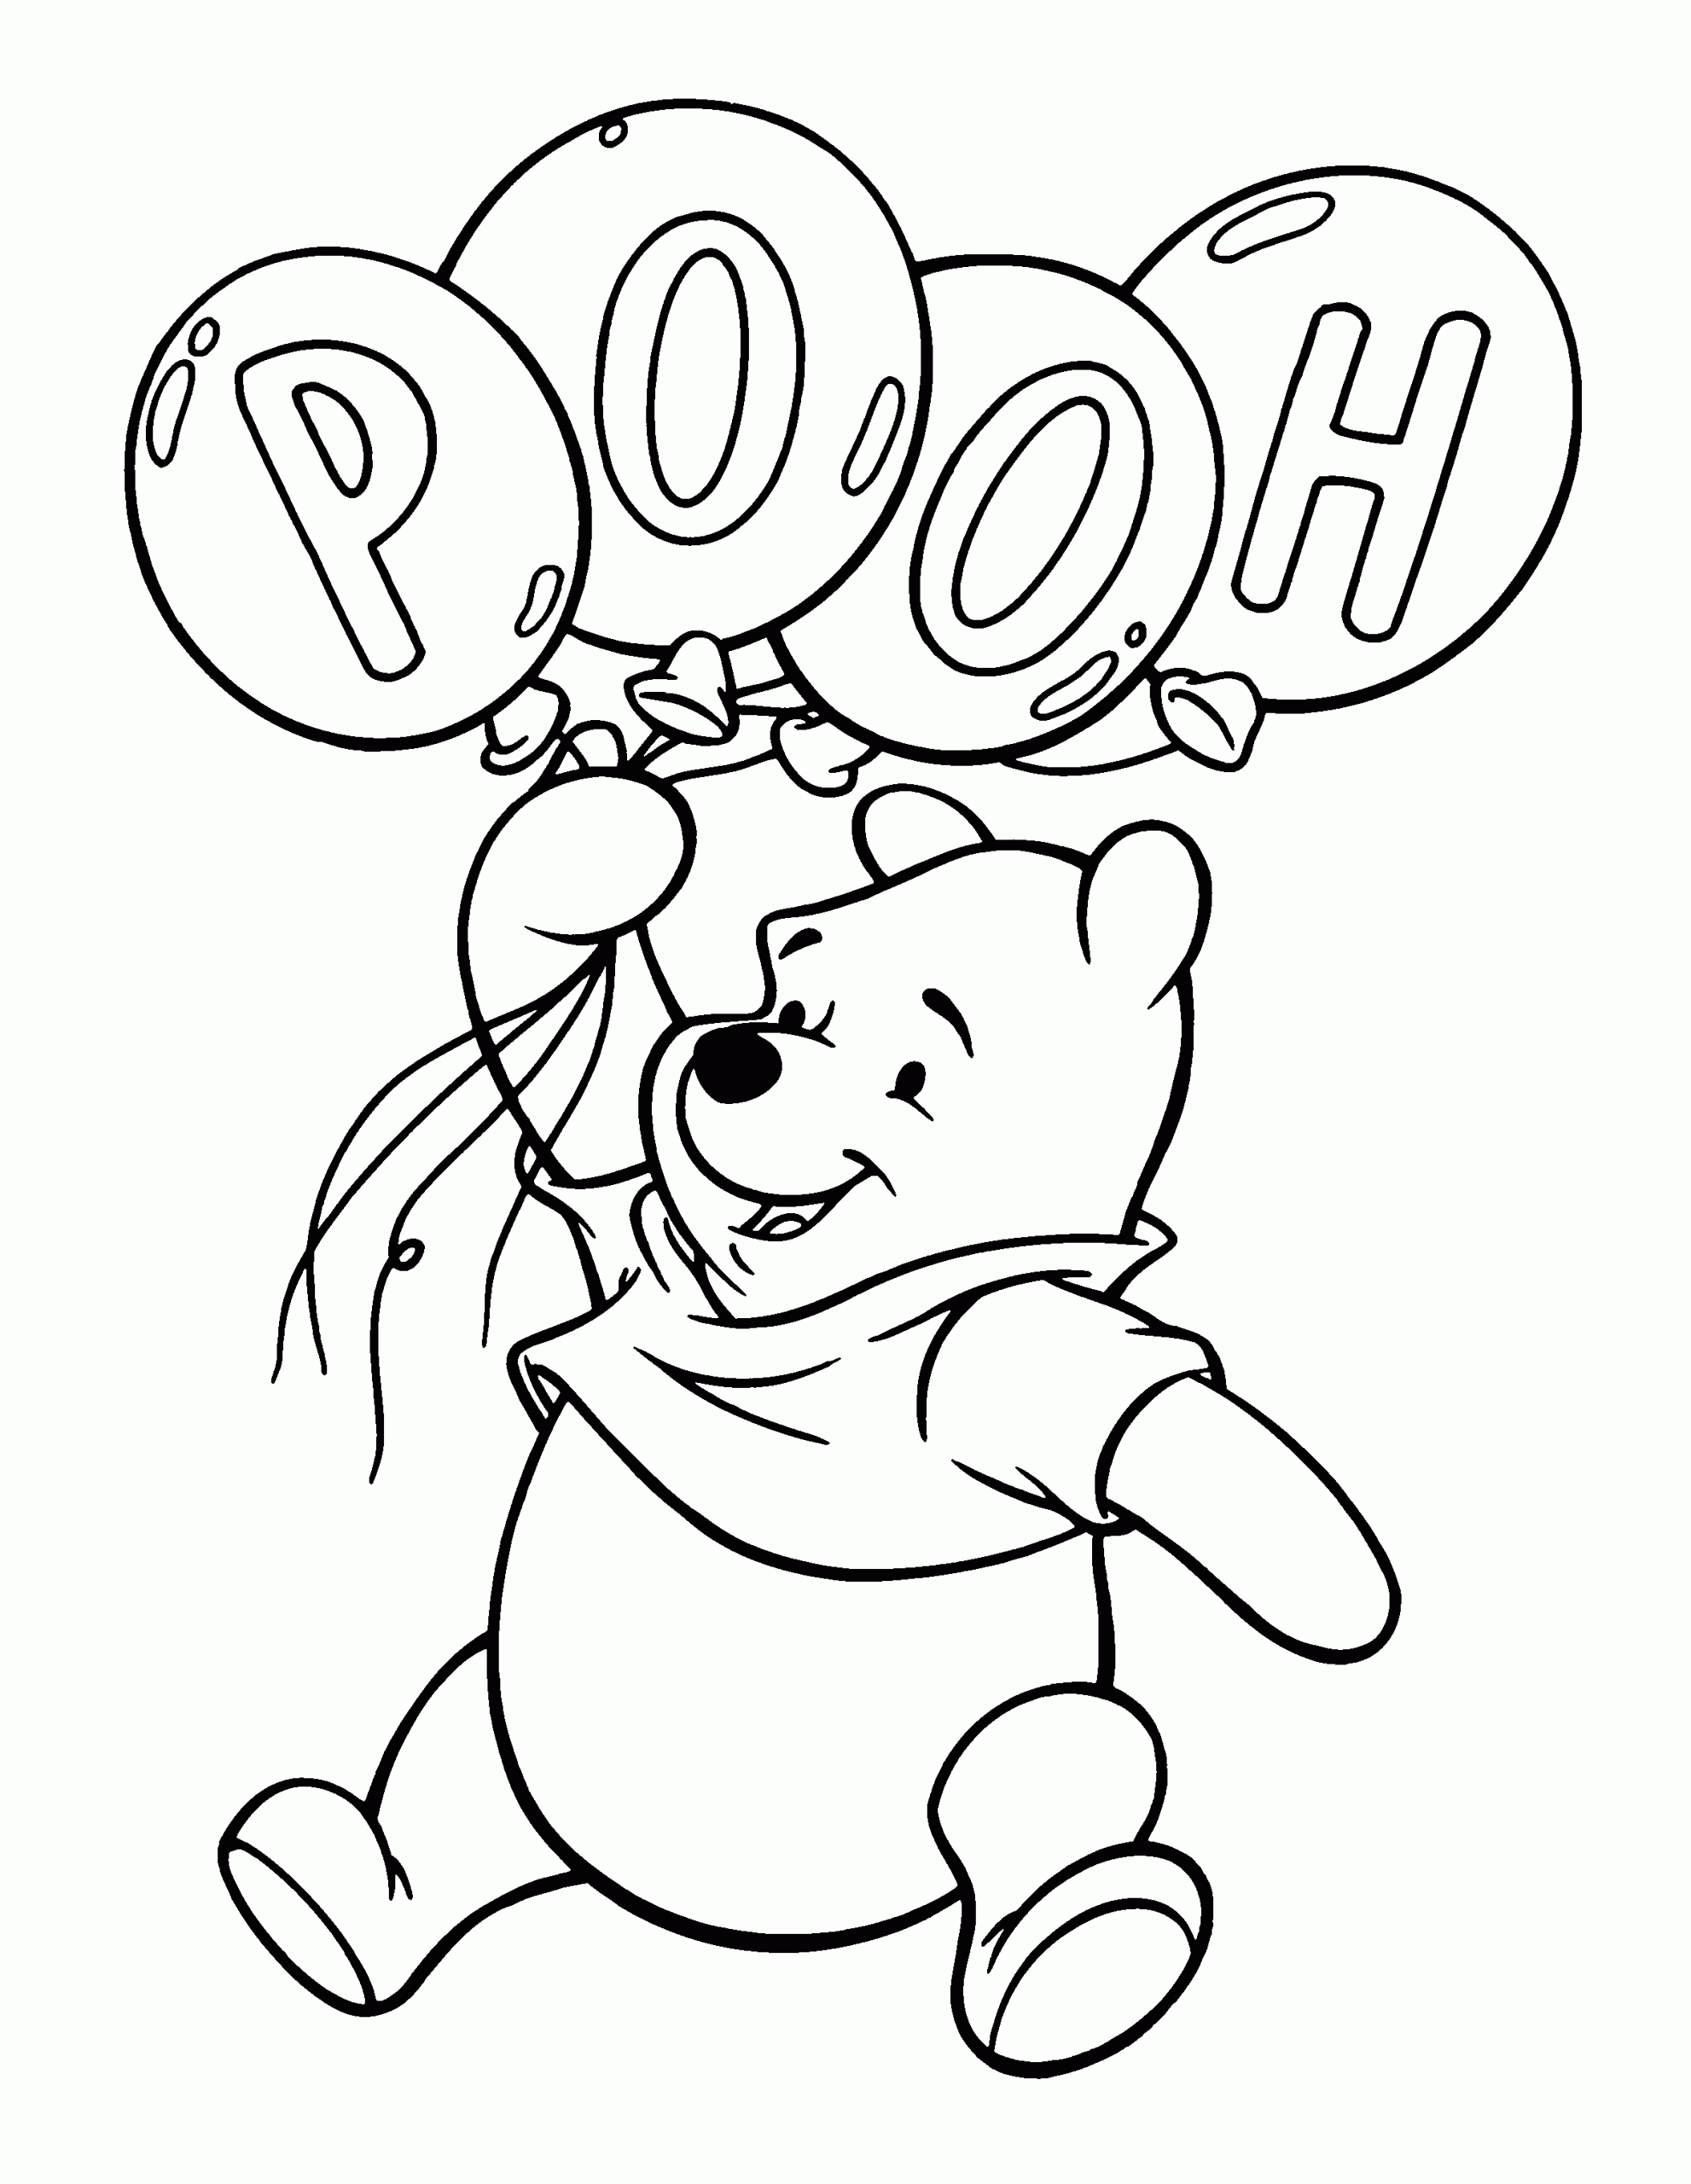 Pooh With Balloons